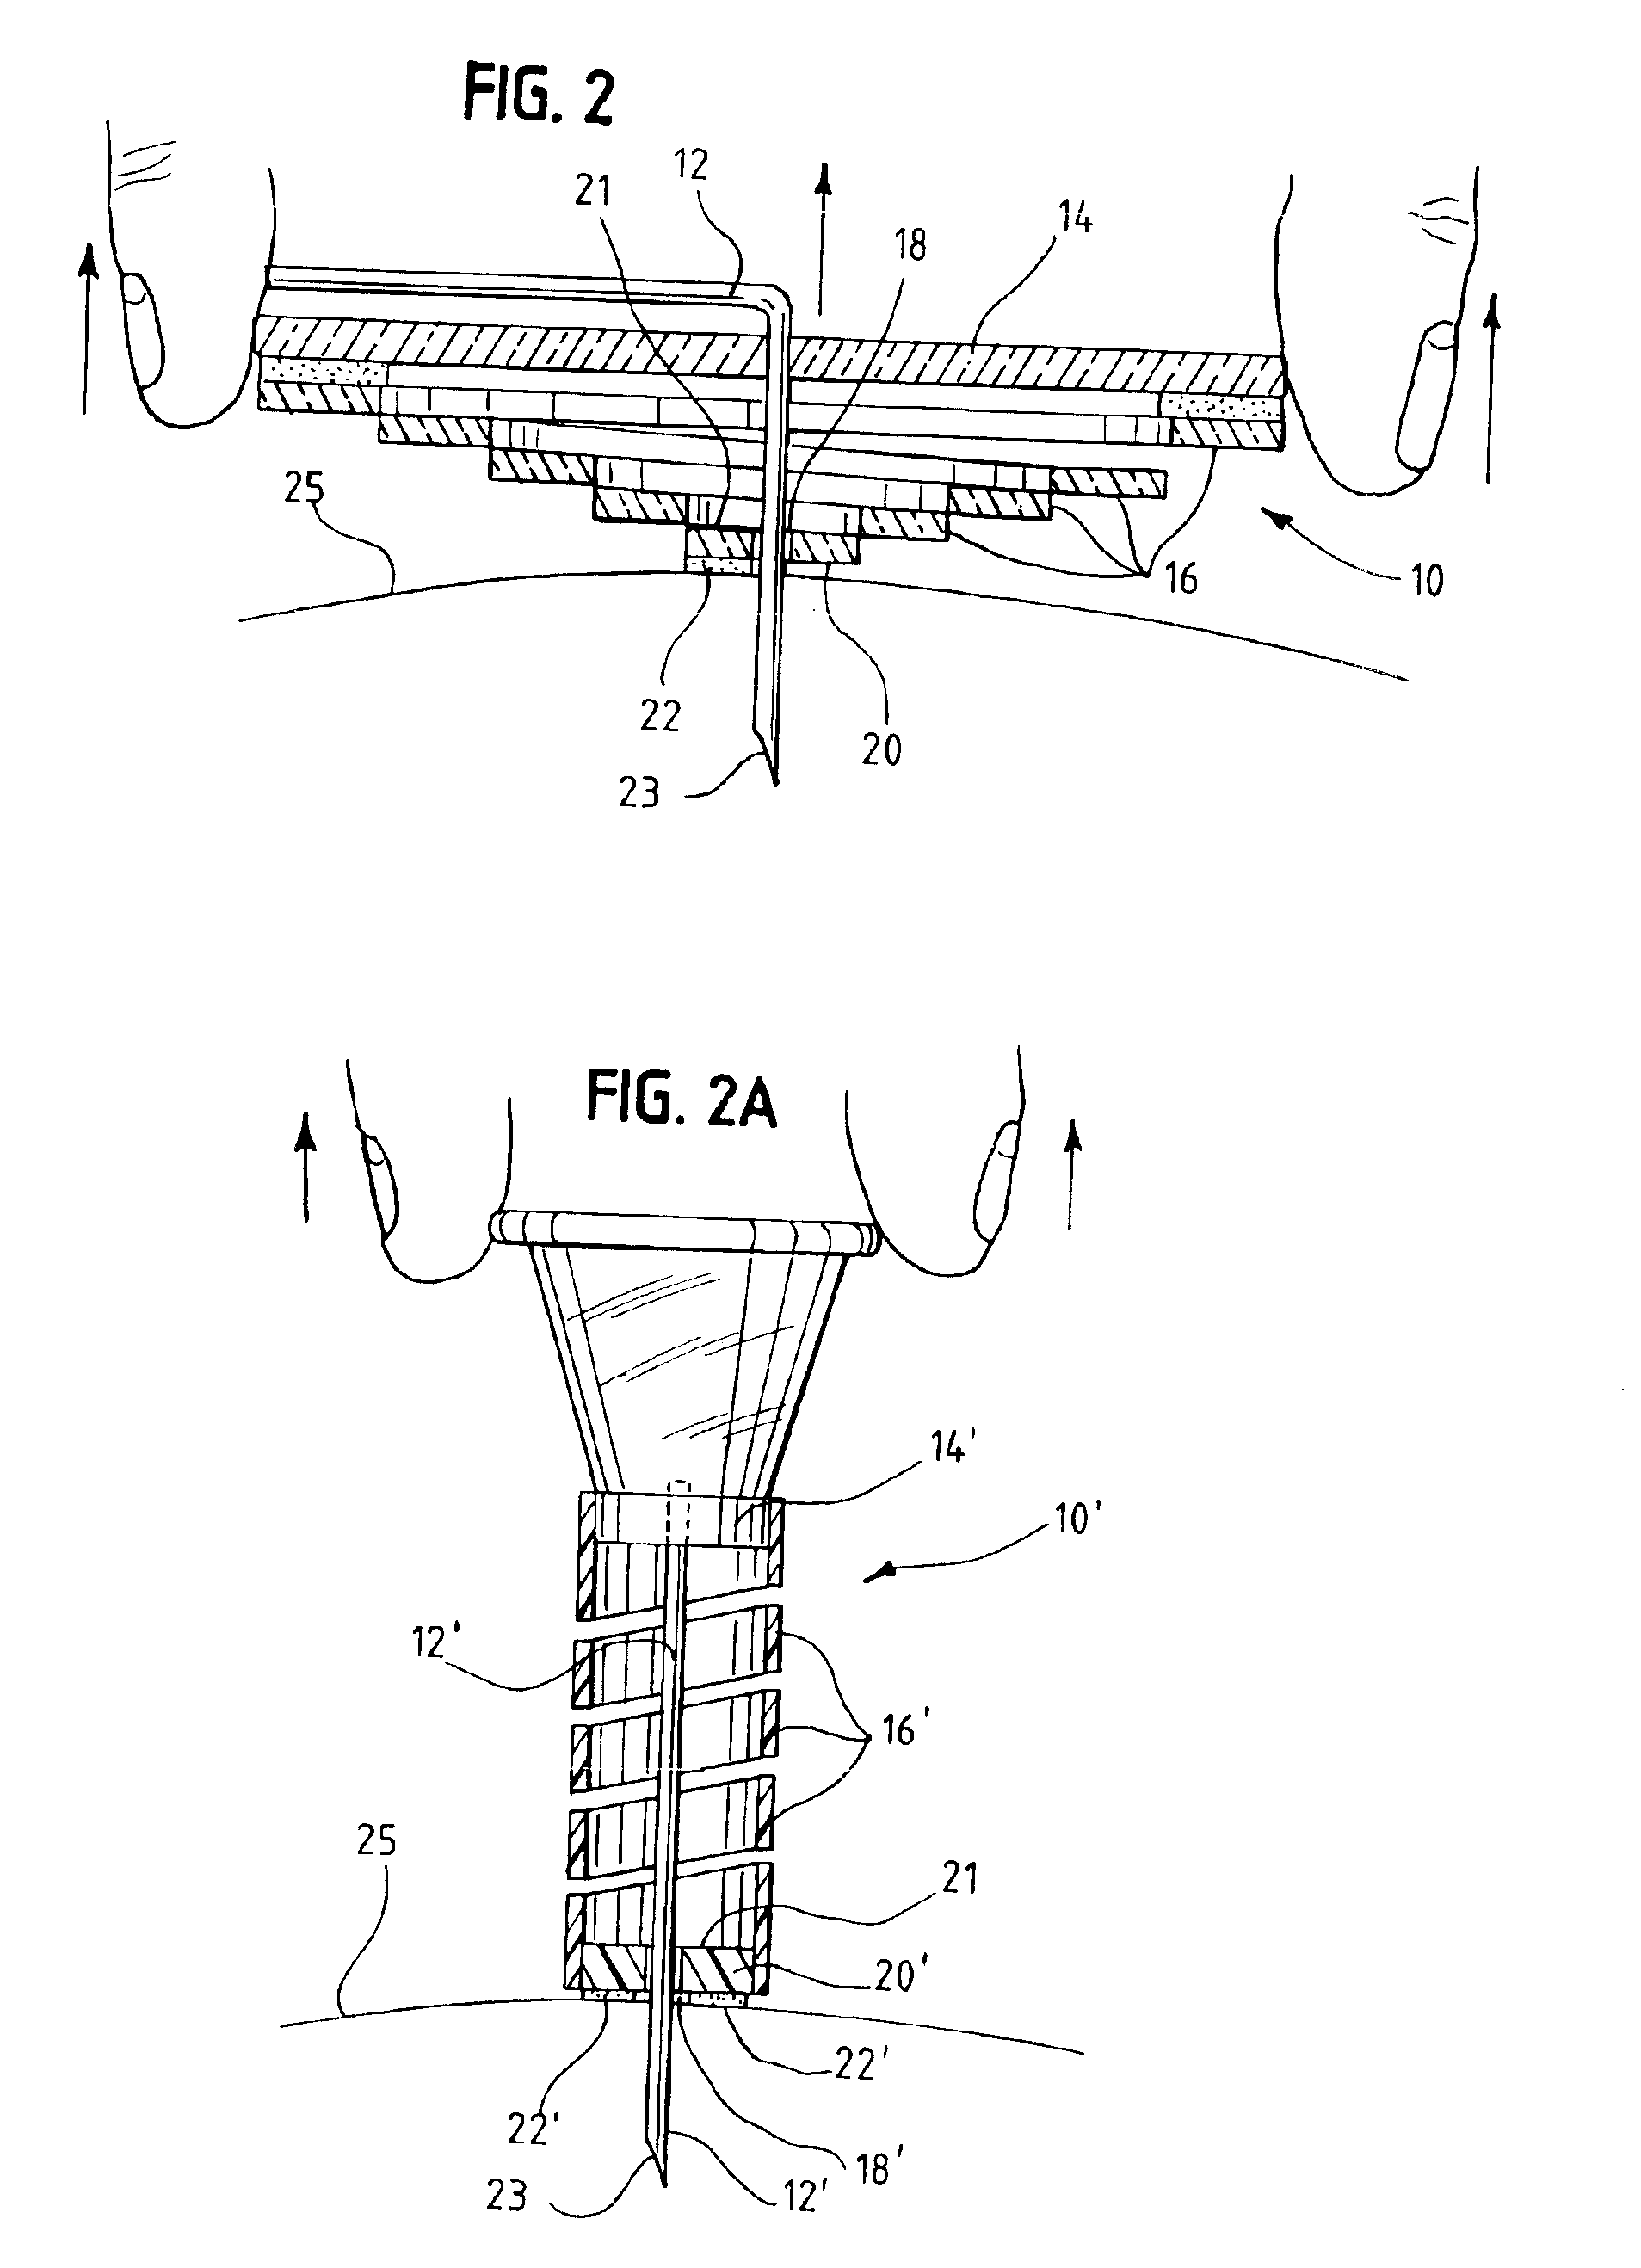 Needle protection device